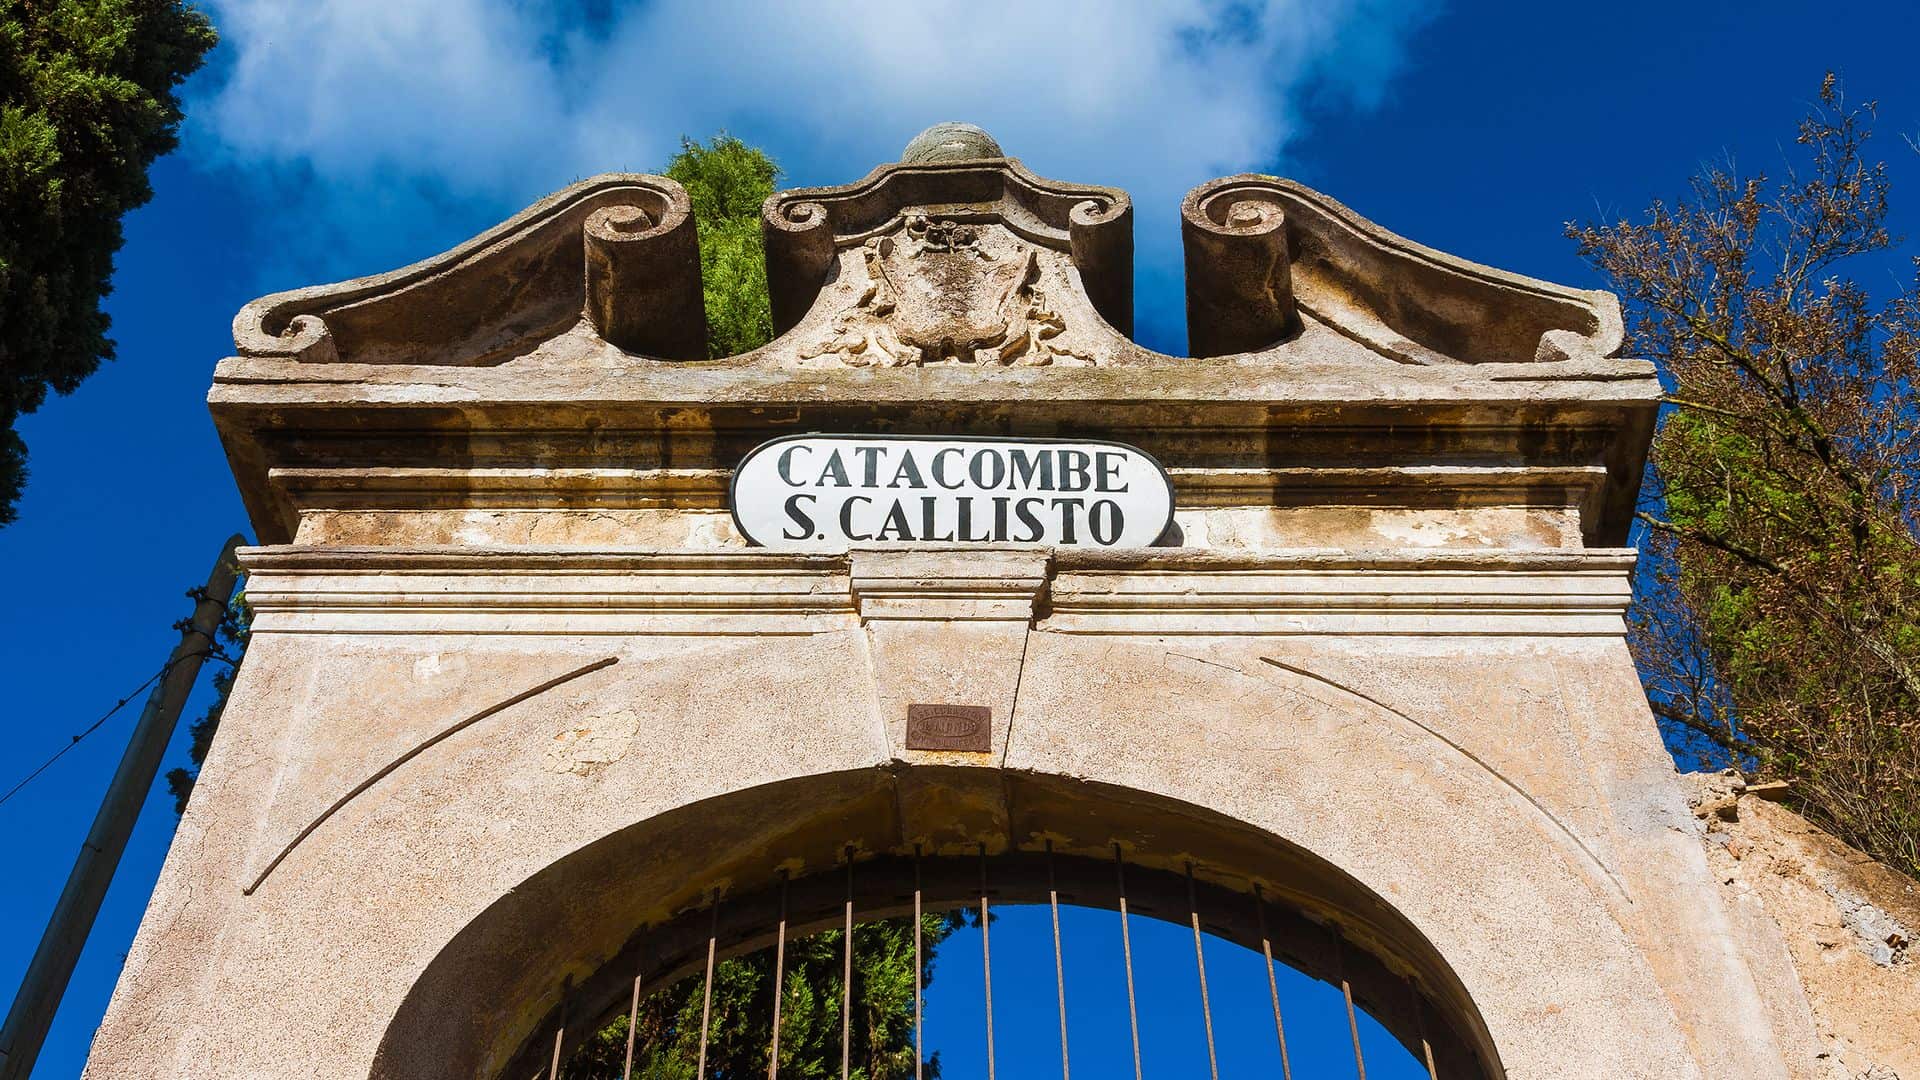 Entrance to the Catacombs of Saint Callixtus in Rome.